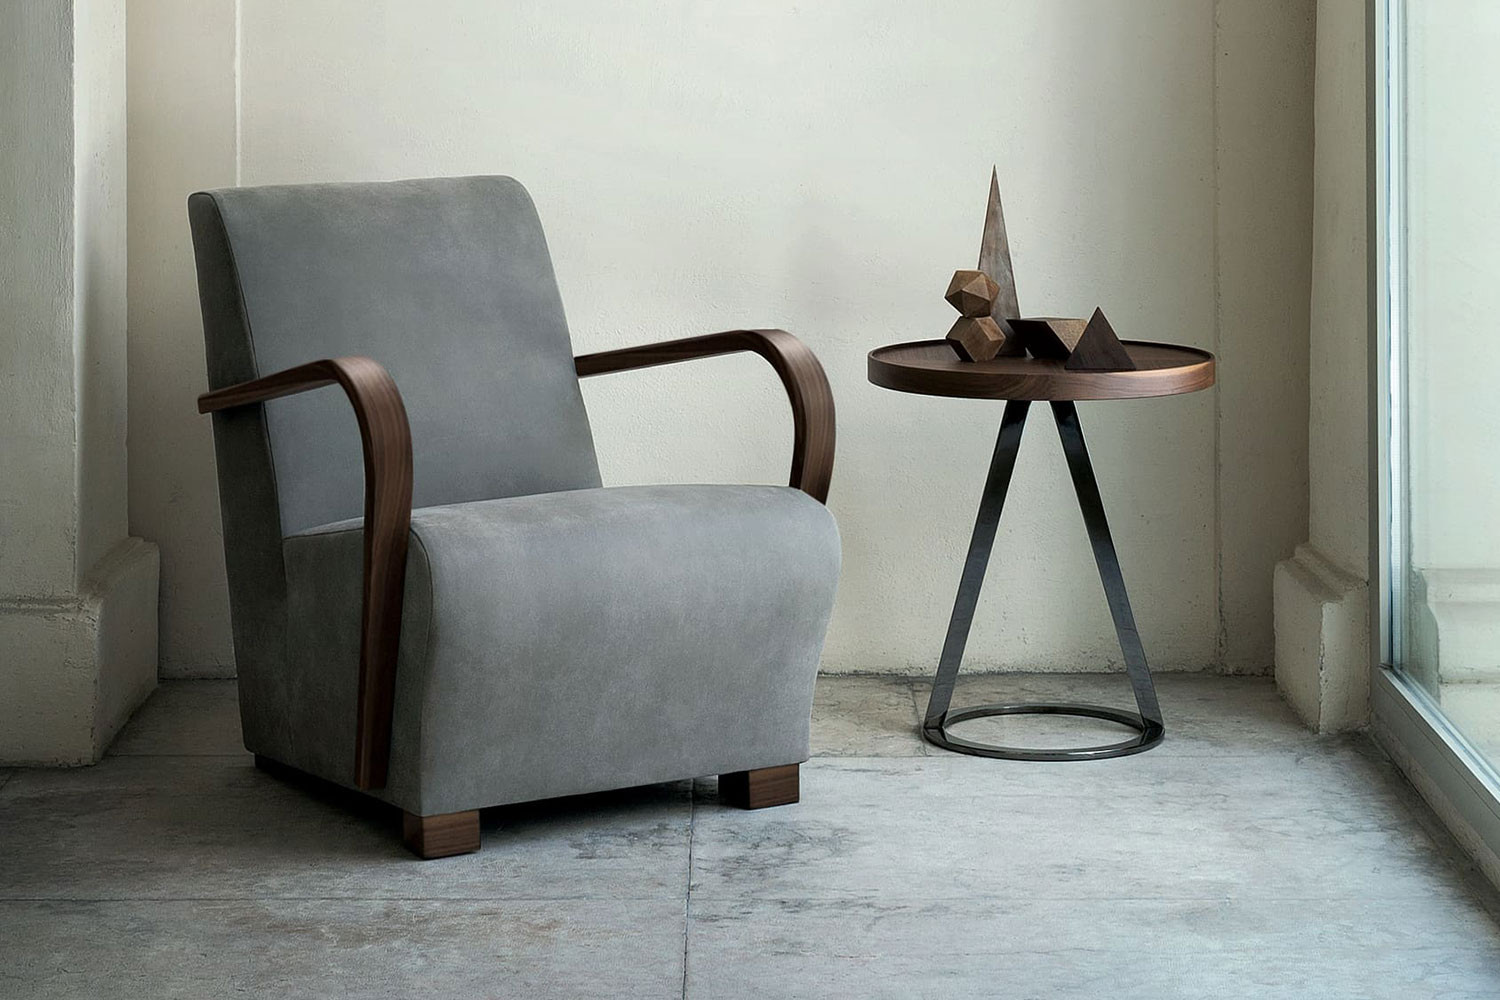 Upholstered bentwood armchair with steam bent curved arms crafted from prized solid walnut